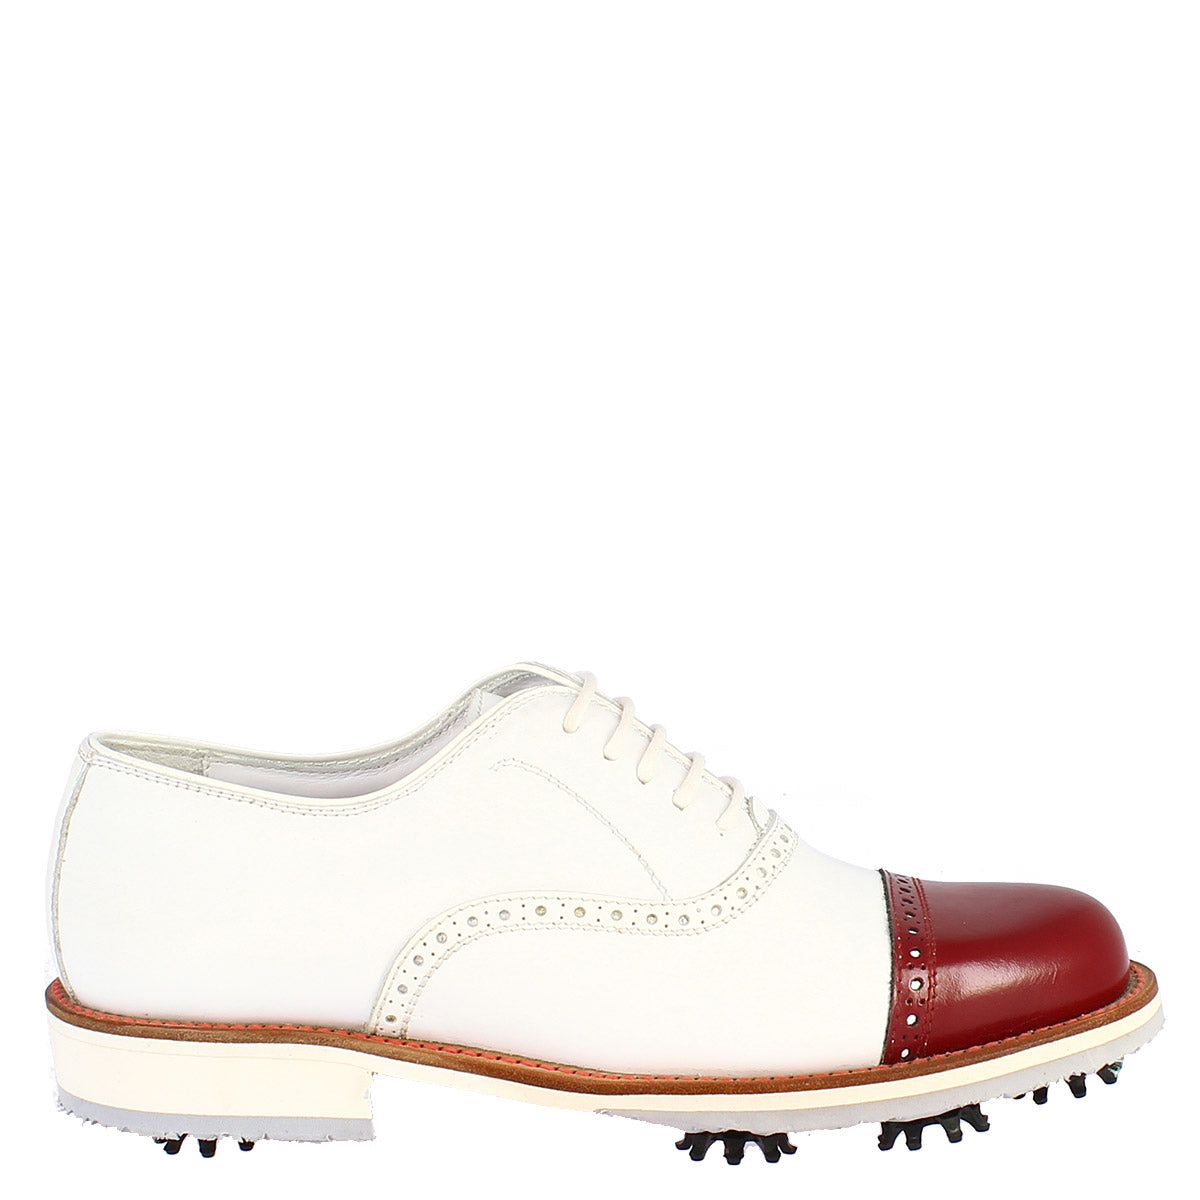 Women's handmade golf shoes in white leather with red tip